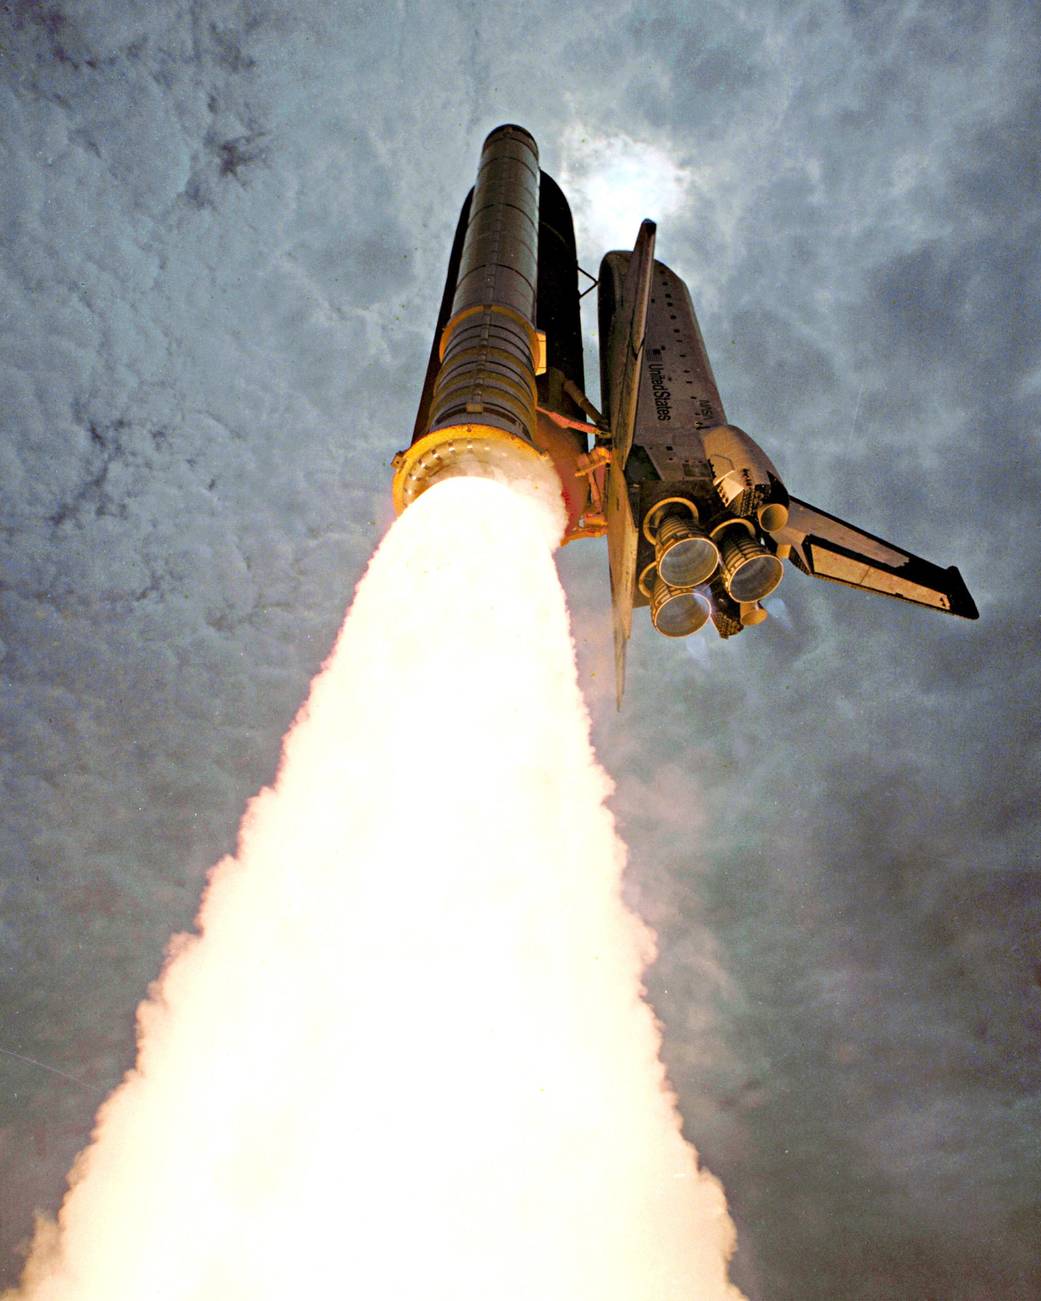 Launch of shuttle Columbia on STS-50 mission.